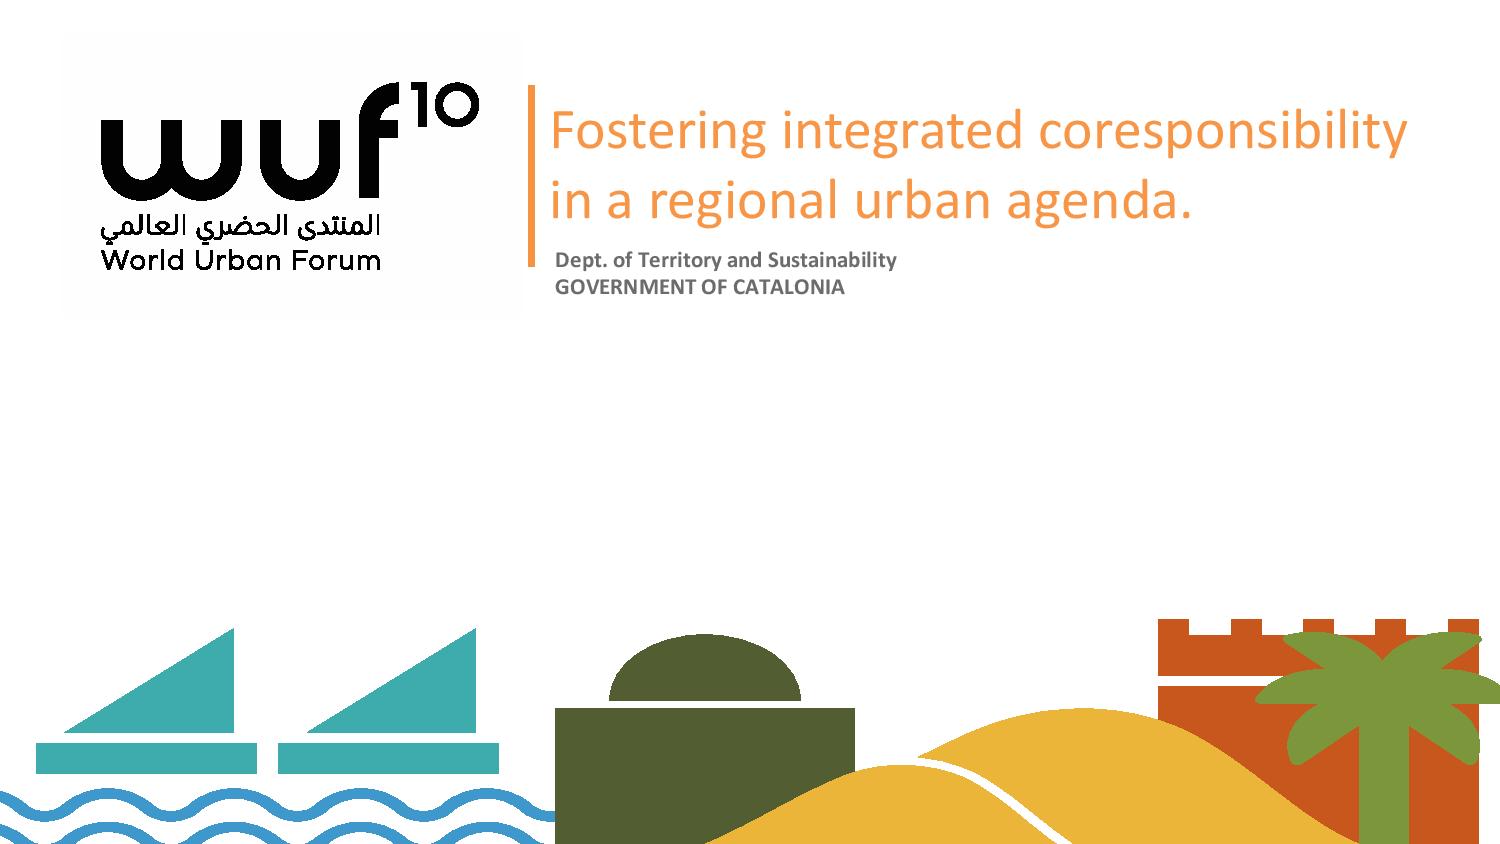 2nd Spatial Planning Platform (SPP) Meeting: Part I – Fostering Integrated Co-responsibility in a Regional Urban Agenda (Government of Catalonia)